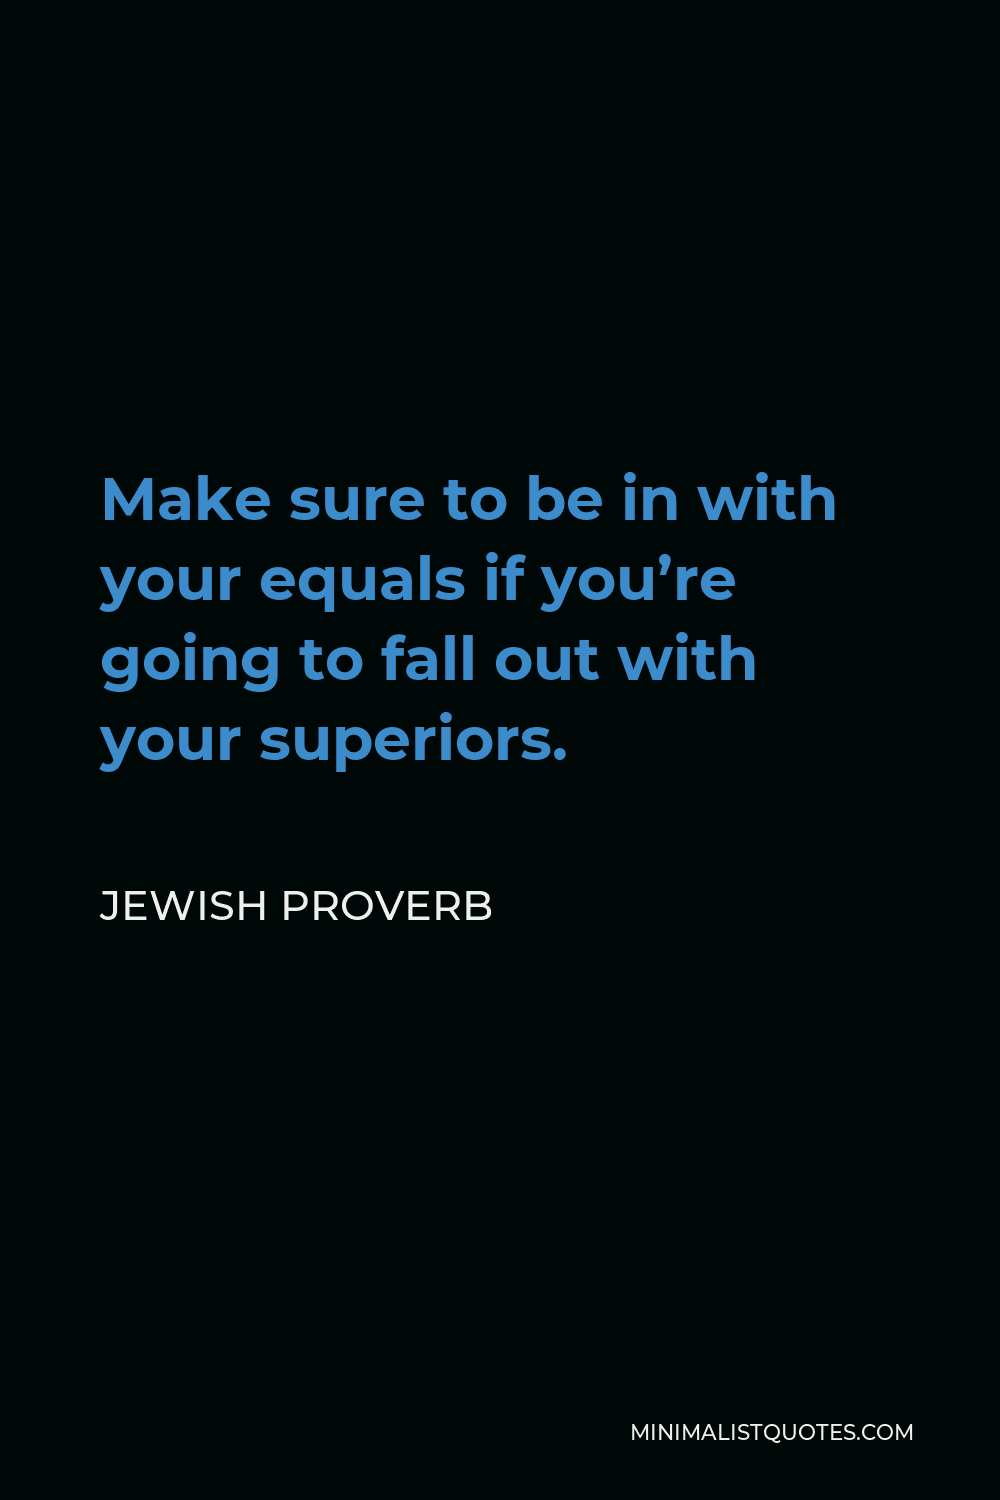 Jewish Proverb Quote - Make sure to be in with your equals if you’re going to fall out with your superiors.